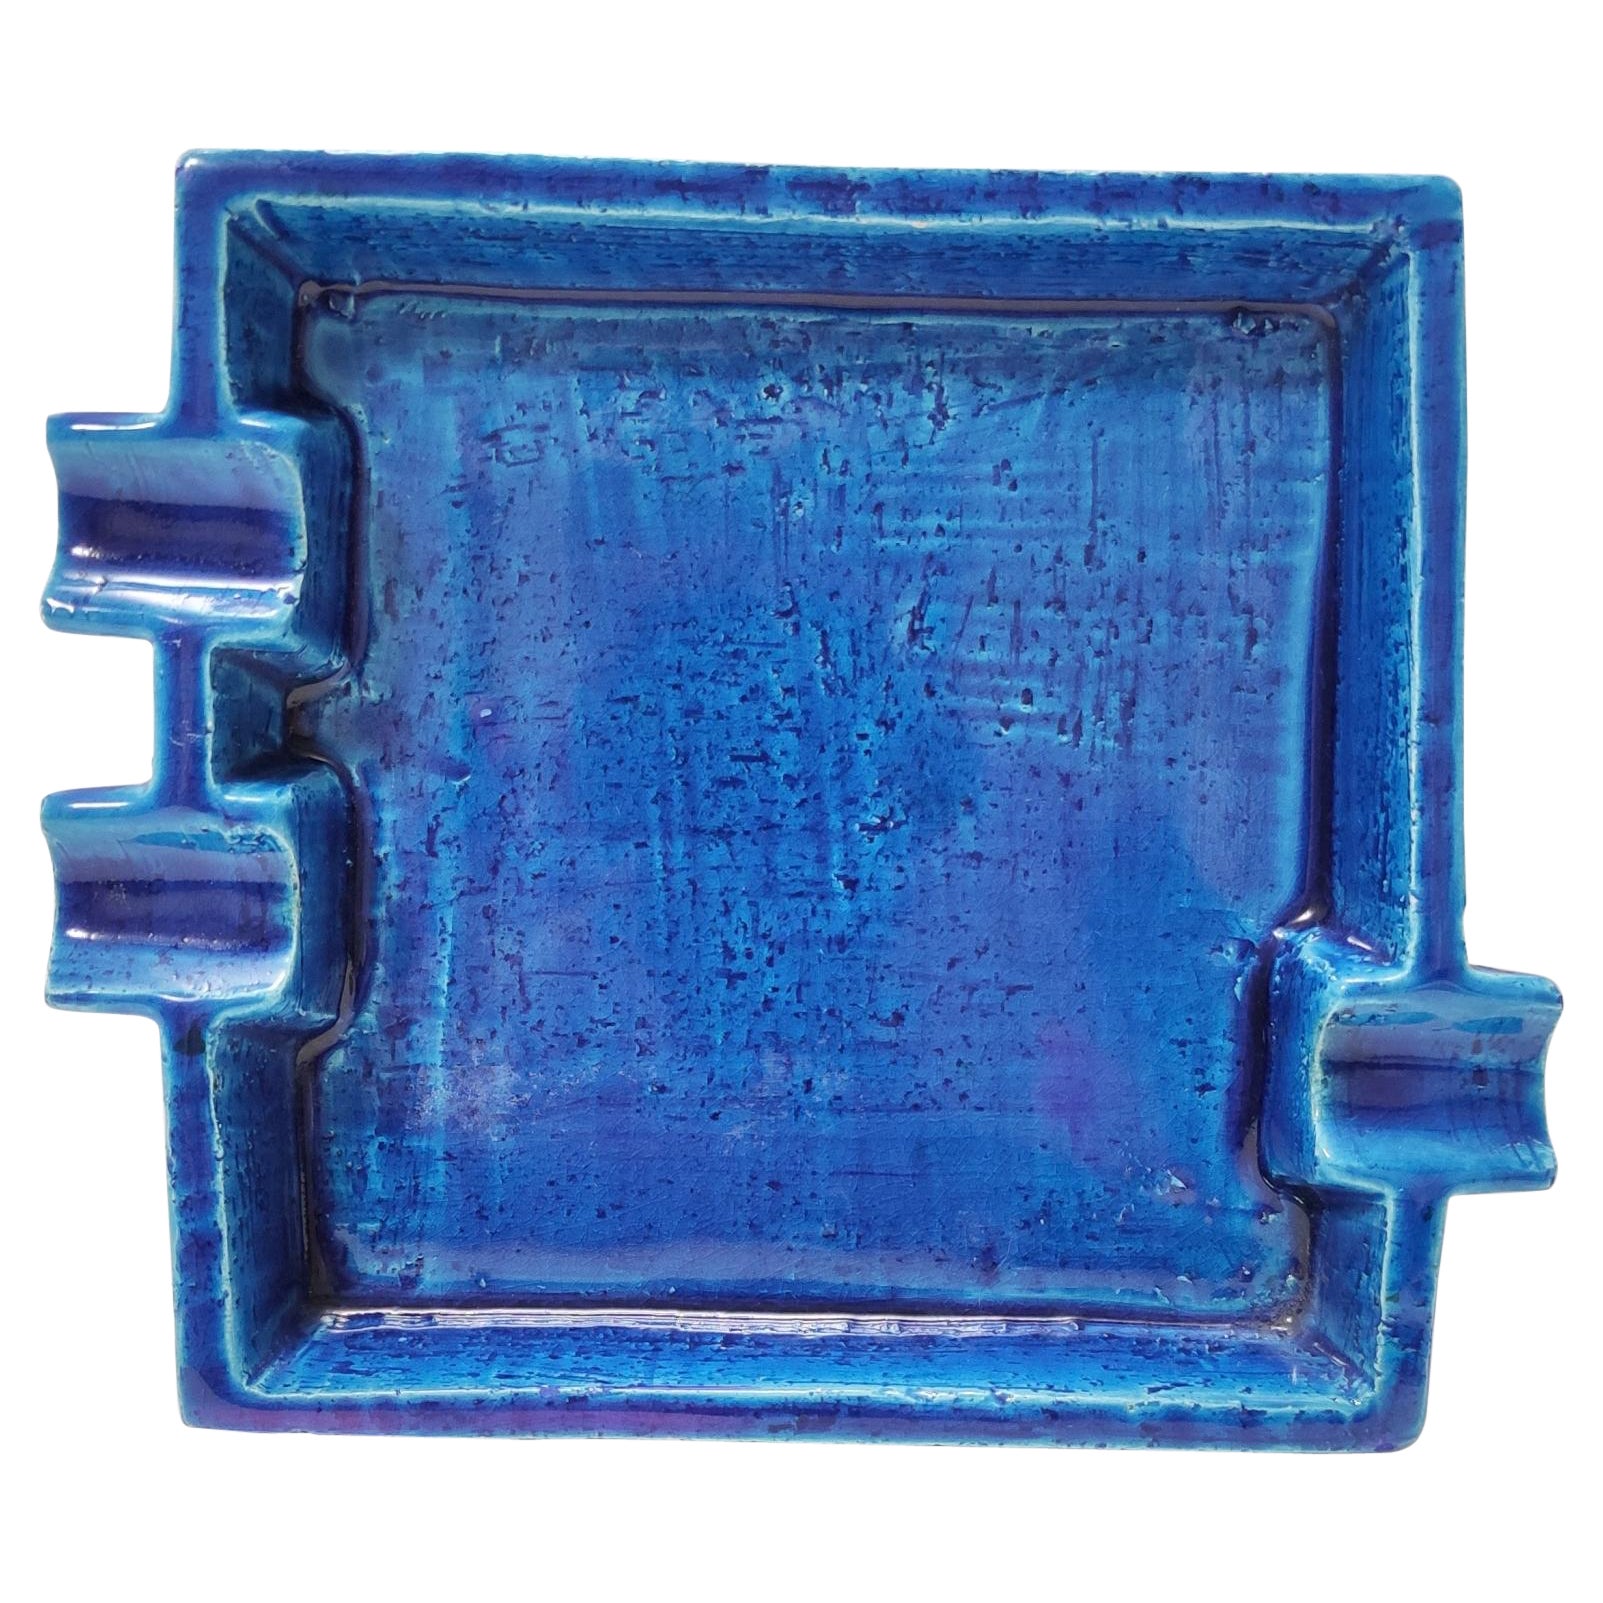 Made in Italy, 1960s.
This ashtray, designed by Aldo Londi and manufactured by Bitossi, is made in Rimini blue glazed ceramic and features 3 cigar or cigarette holders. 
It is a vintage piece, therefore it might show slight traces of use, but it